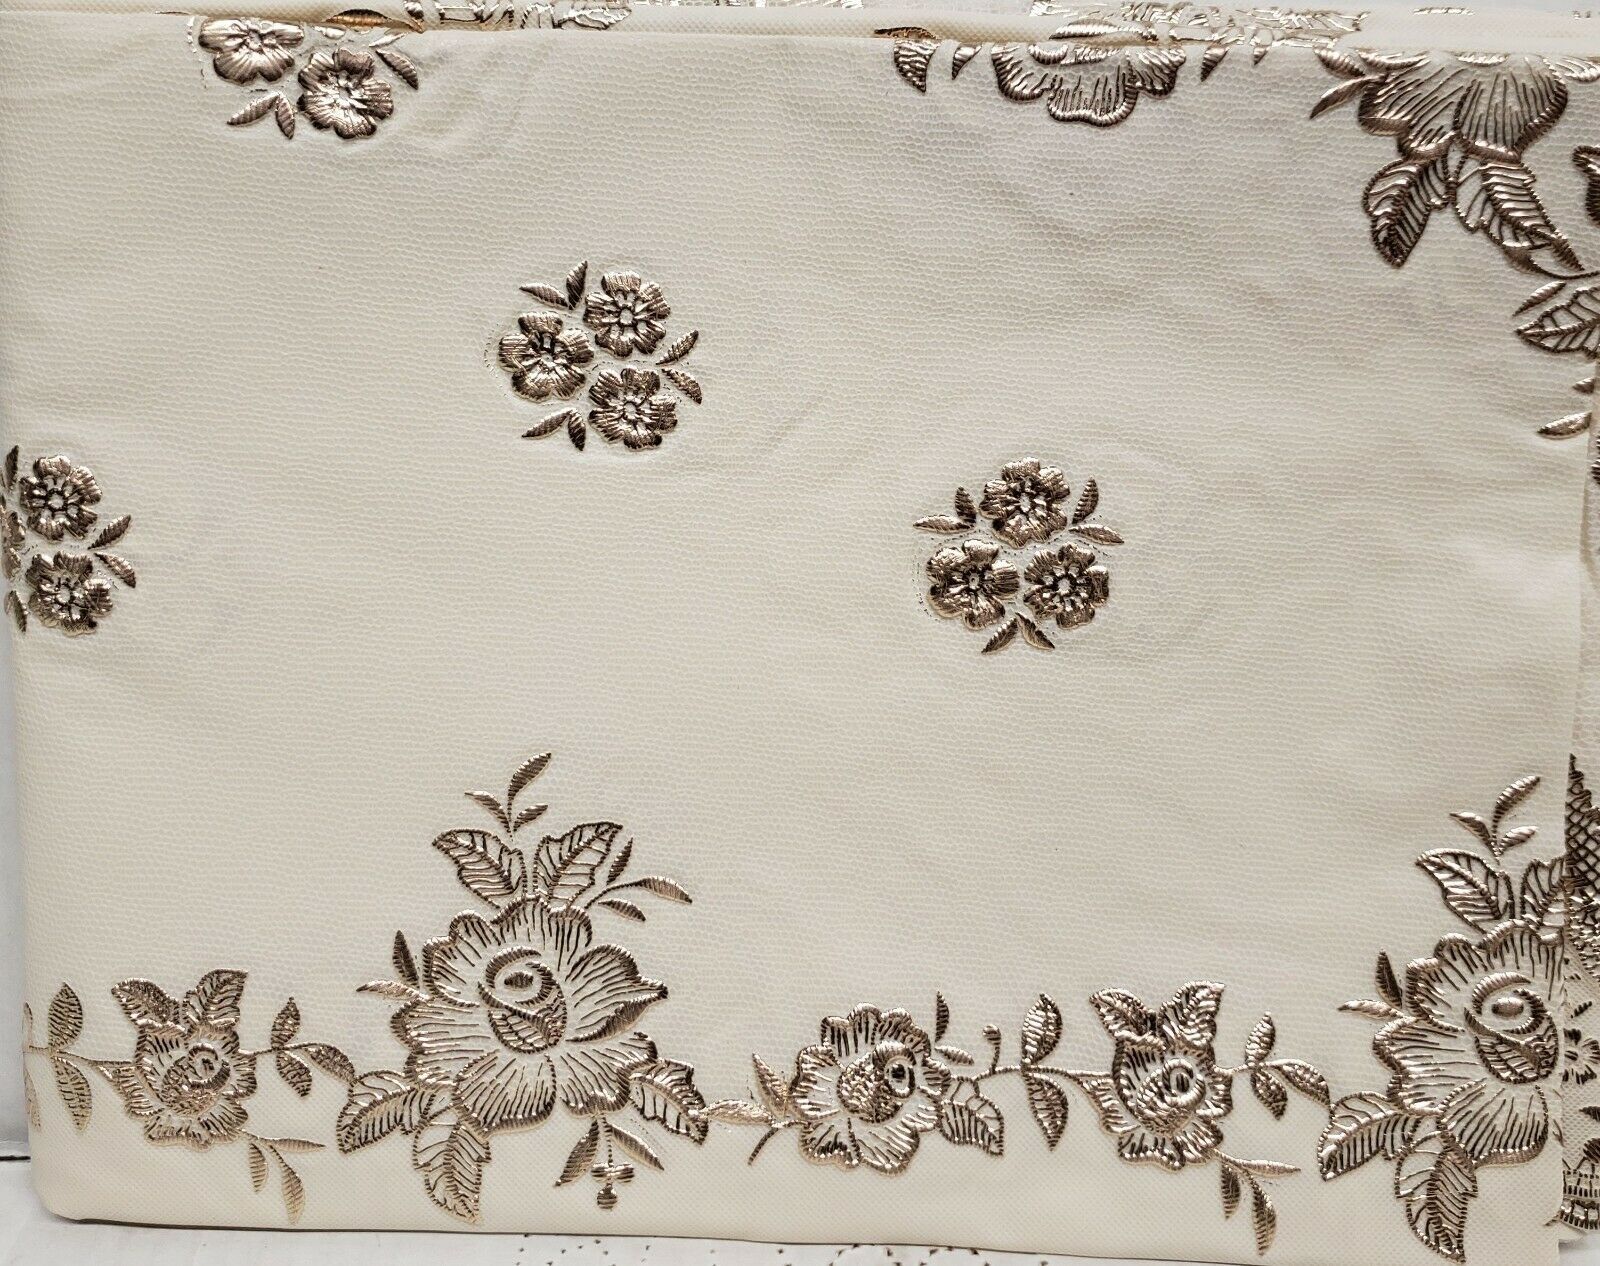 Primary image for Supreme Heavy Duty Vinyl PVC Lace Tablecloth,60"x90",rect,EMBROIDERED FLOWERS,HS